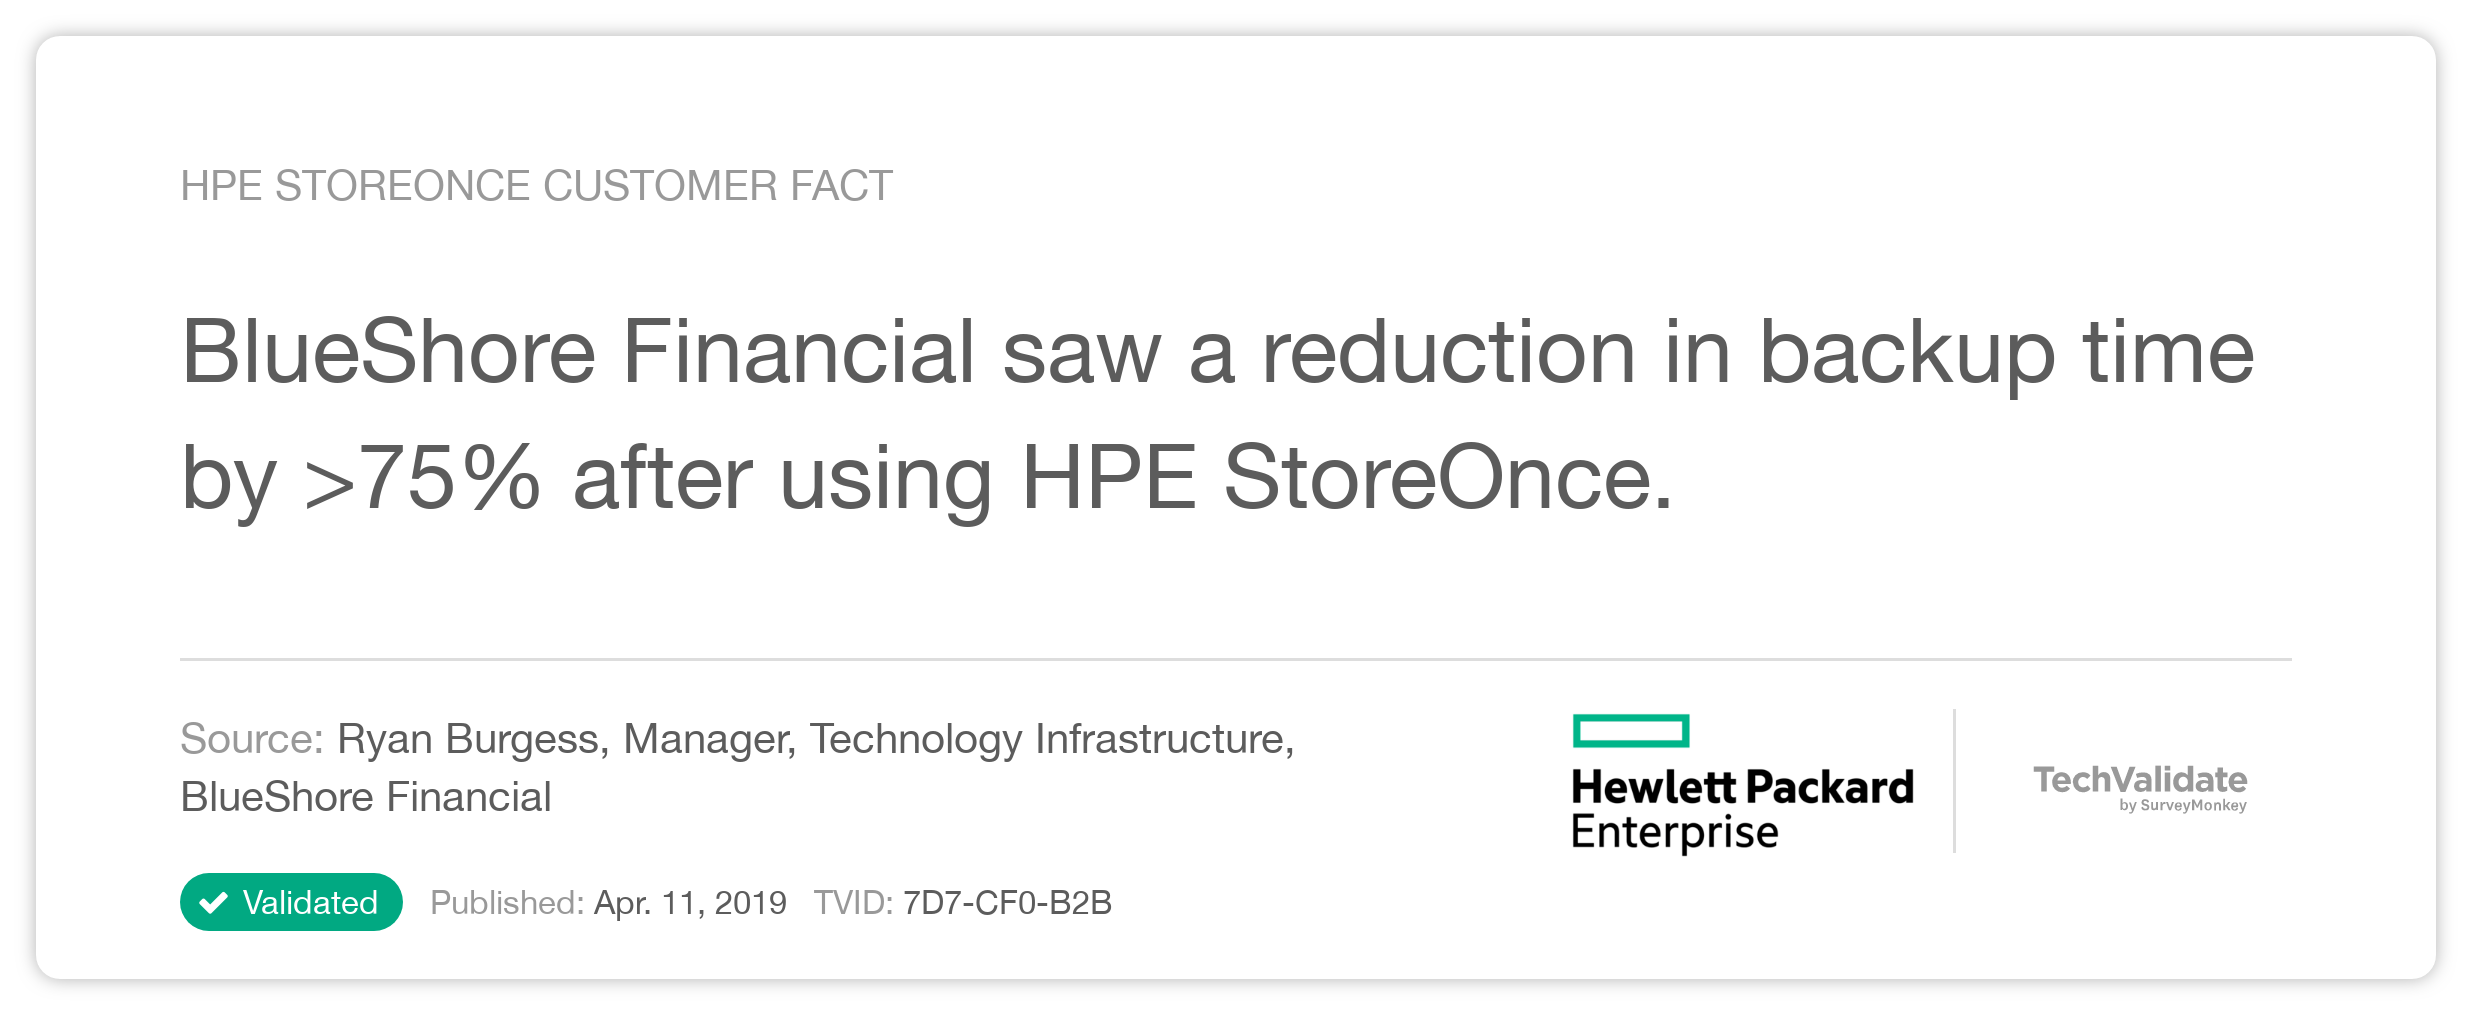 HPE StoreOnce Customer Fact